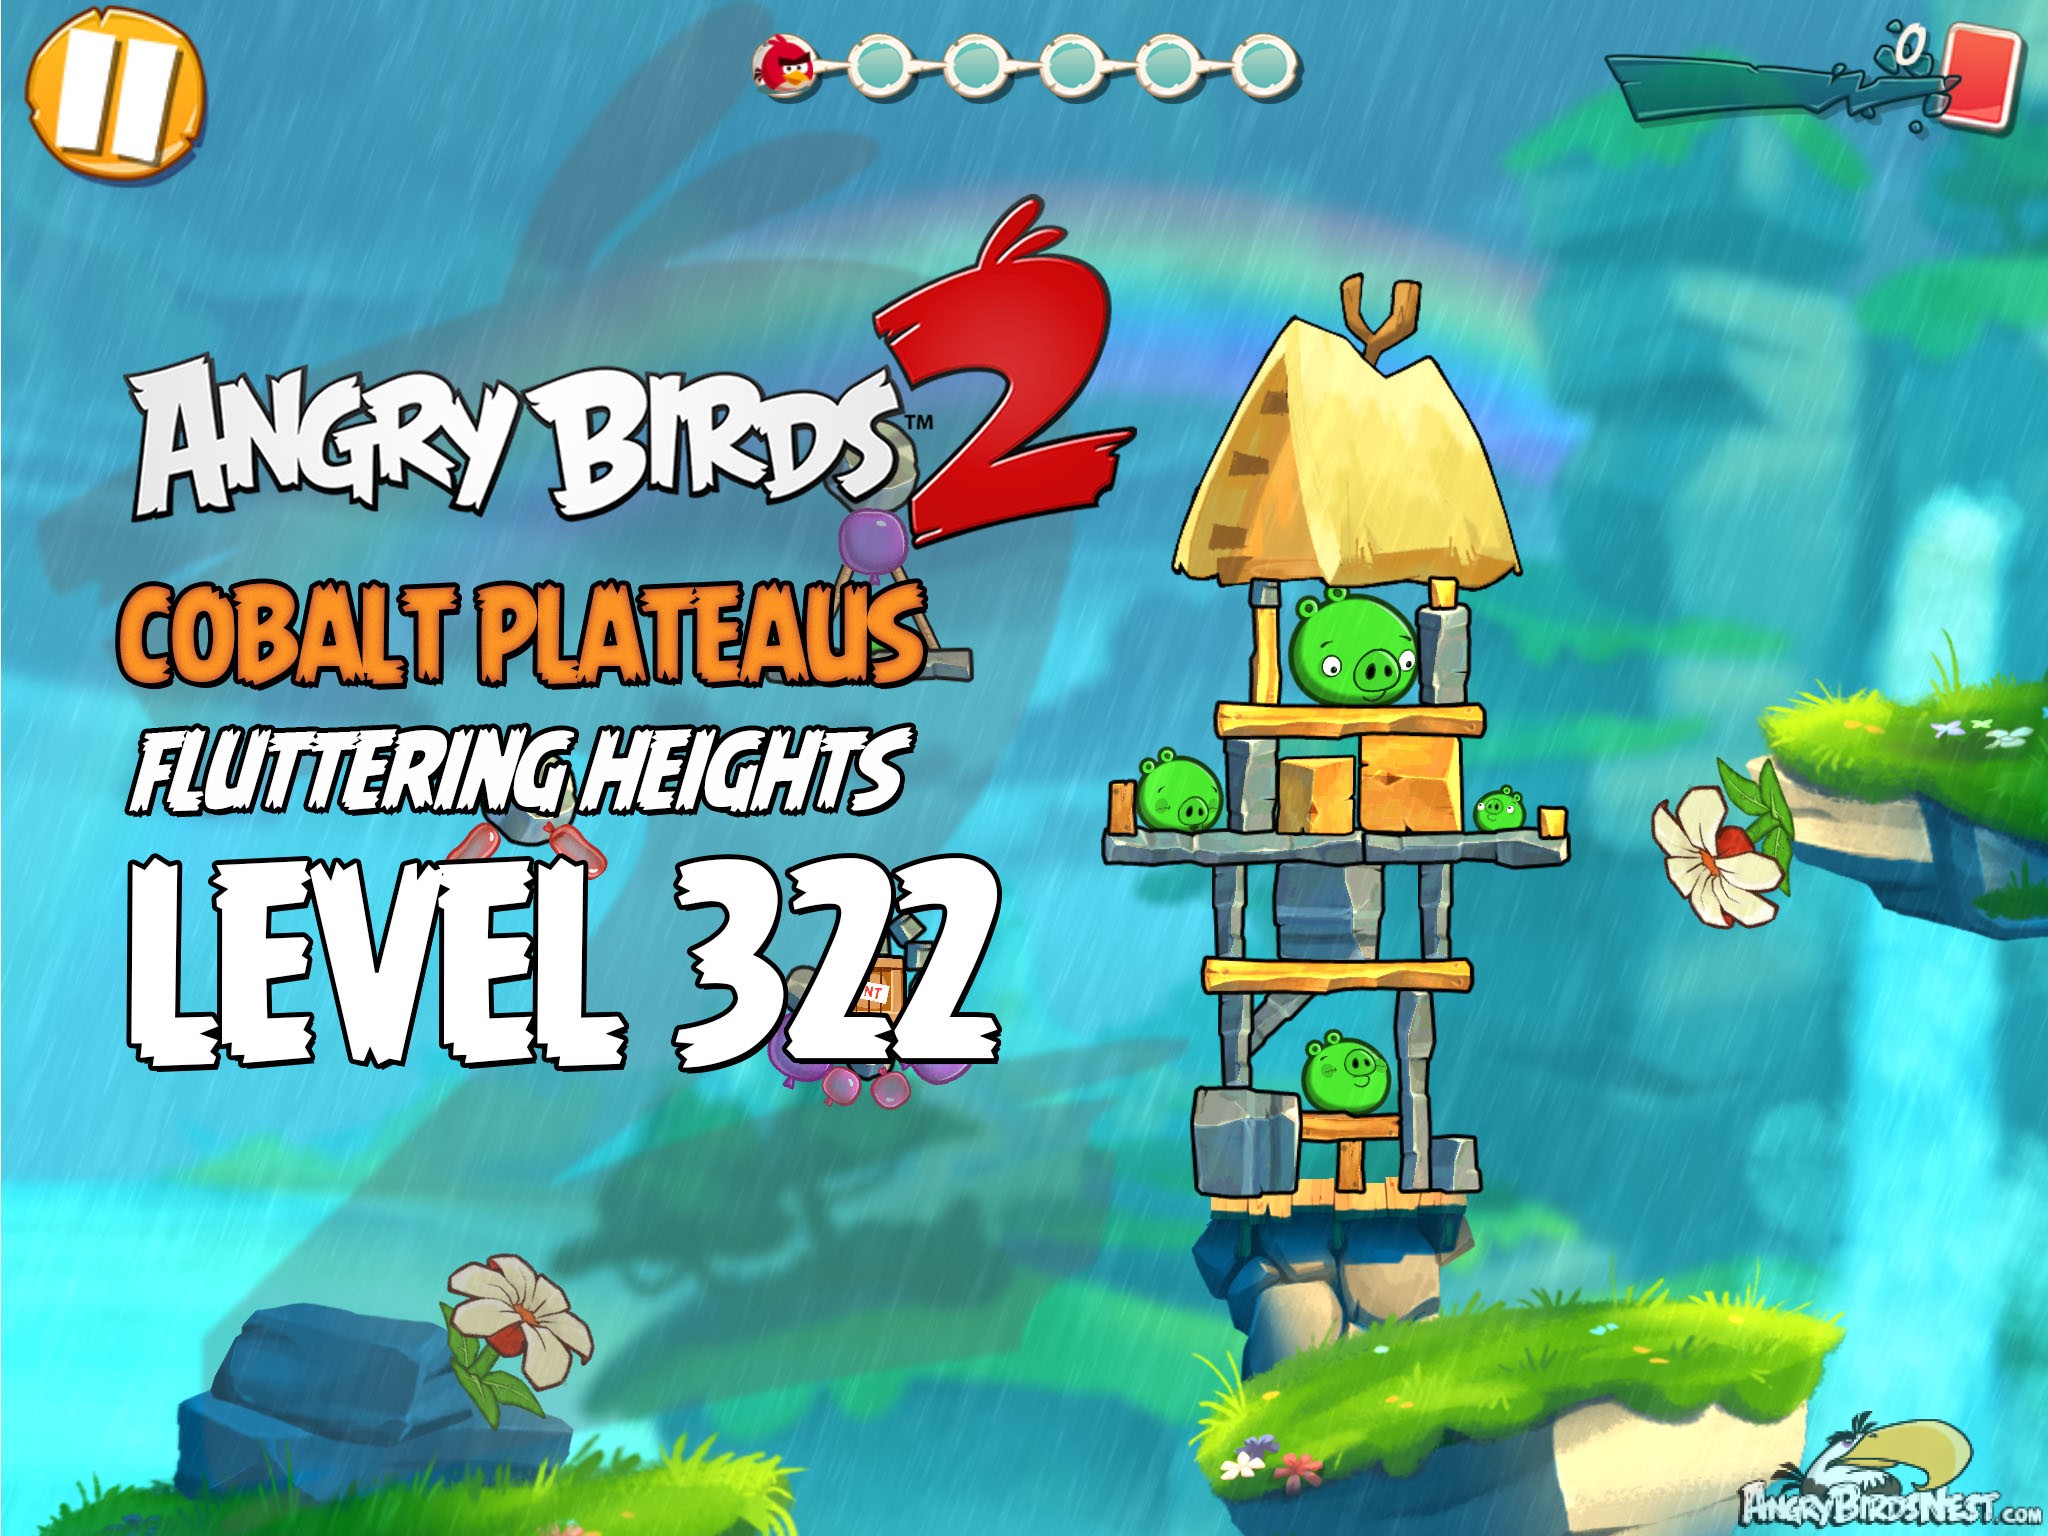 Angry Birds 2 Level 322 Cobalt Plateaus Fluttering Heights Image